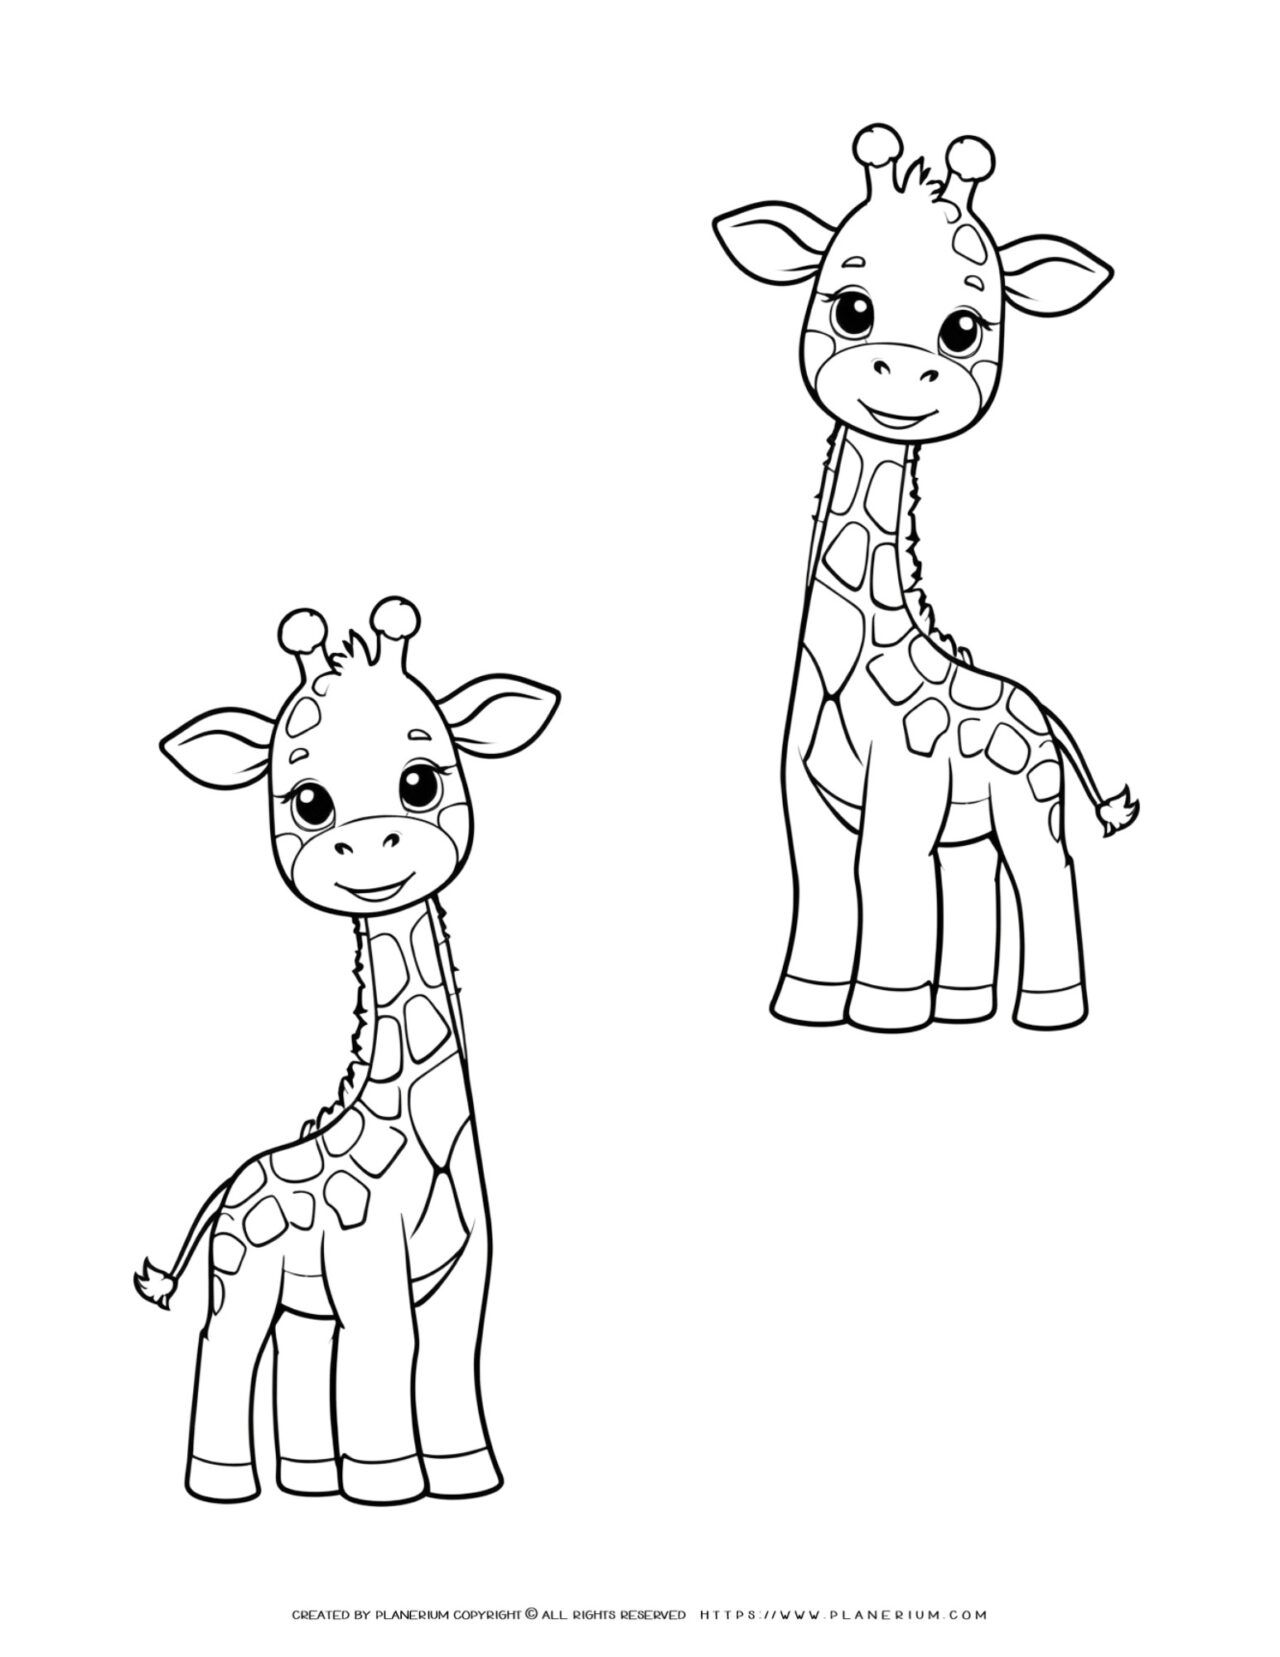 two-cute-giraffe-outline-coloring-page-for-kids